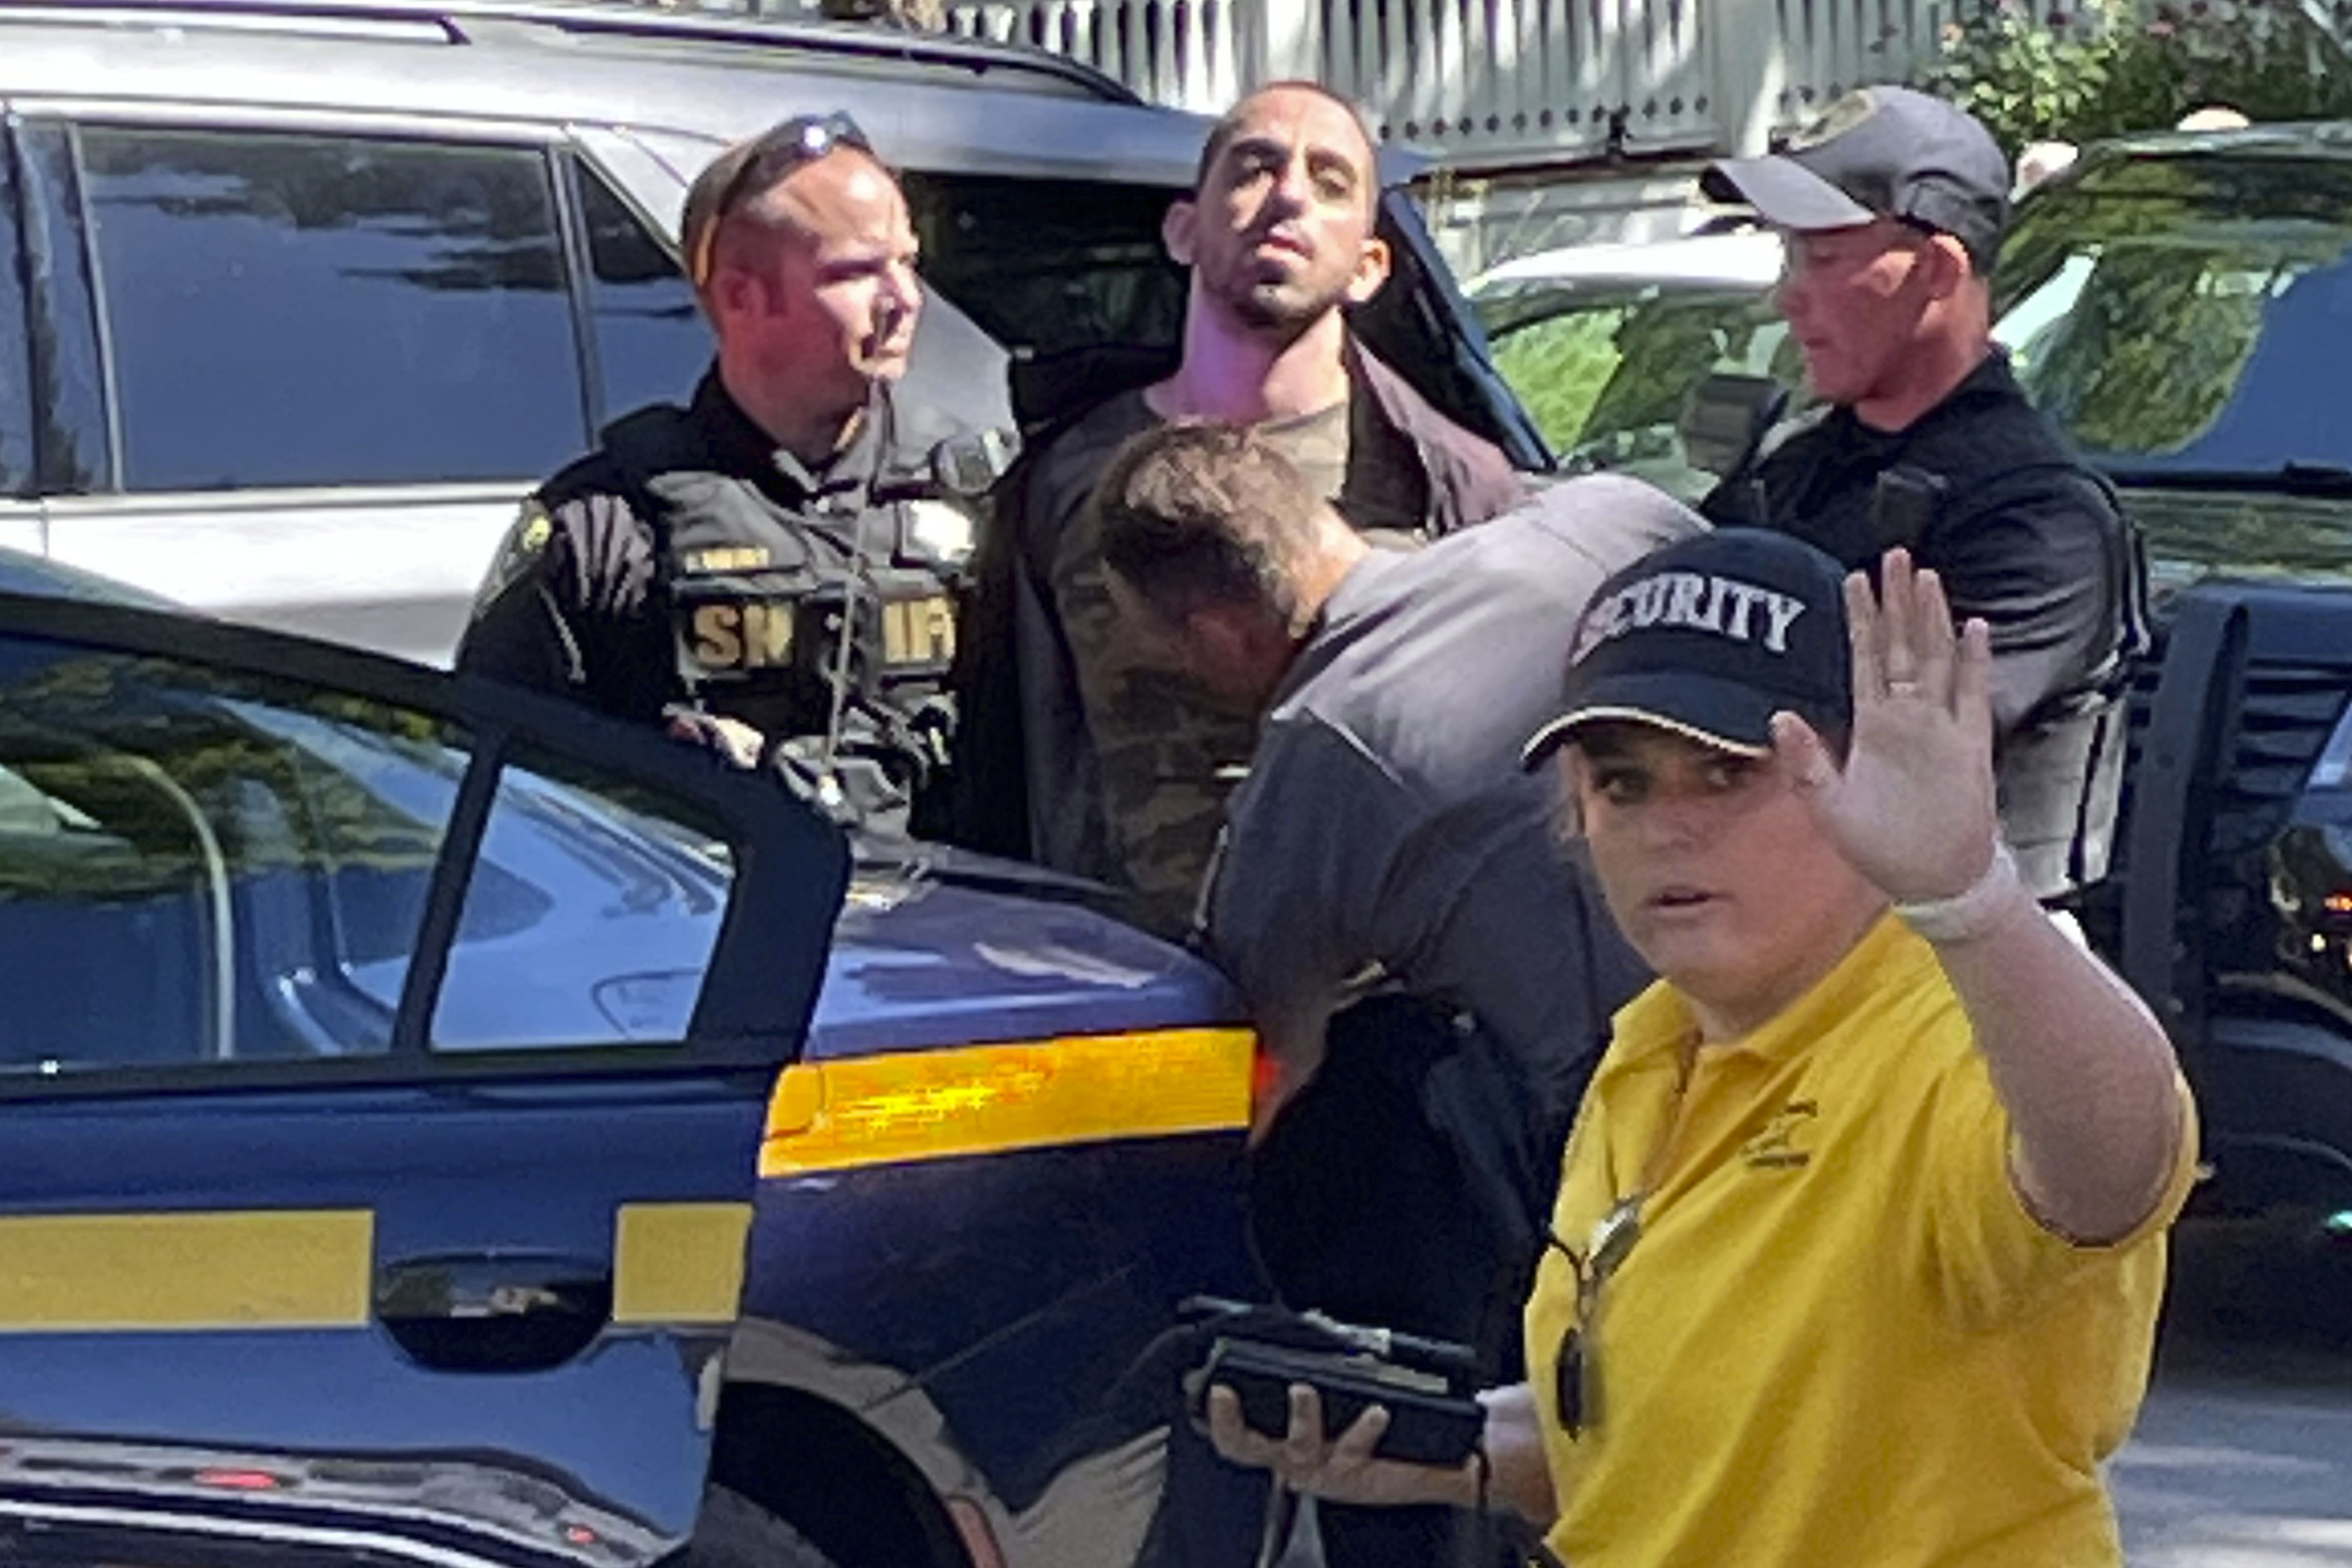 Law enforcement officers detain a person outside the Chautauqua Institution, Friday, Aug. 12, 2022, in Chautauqua, N.Y.